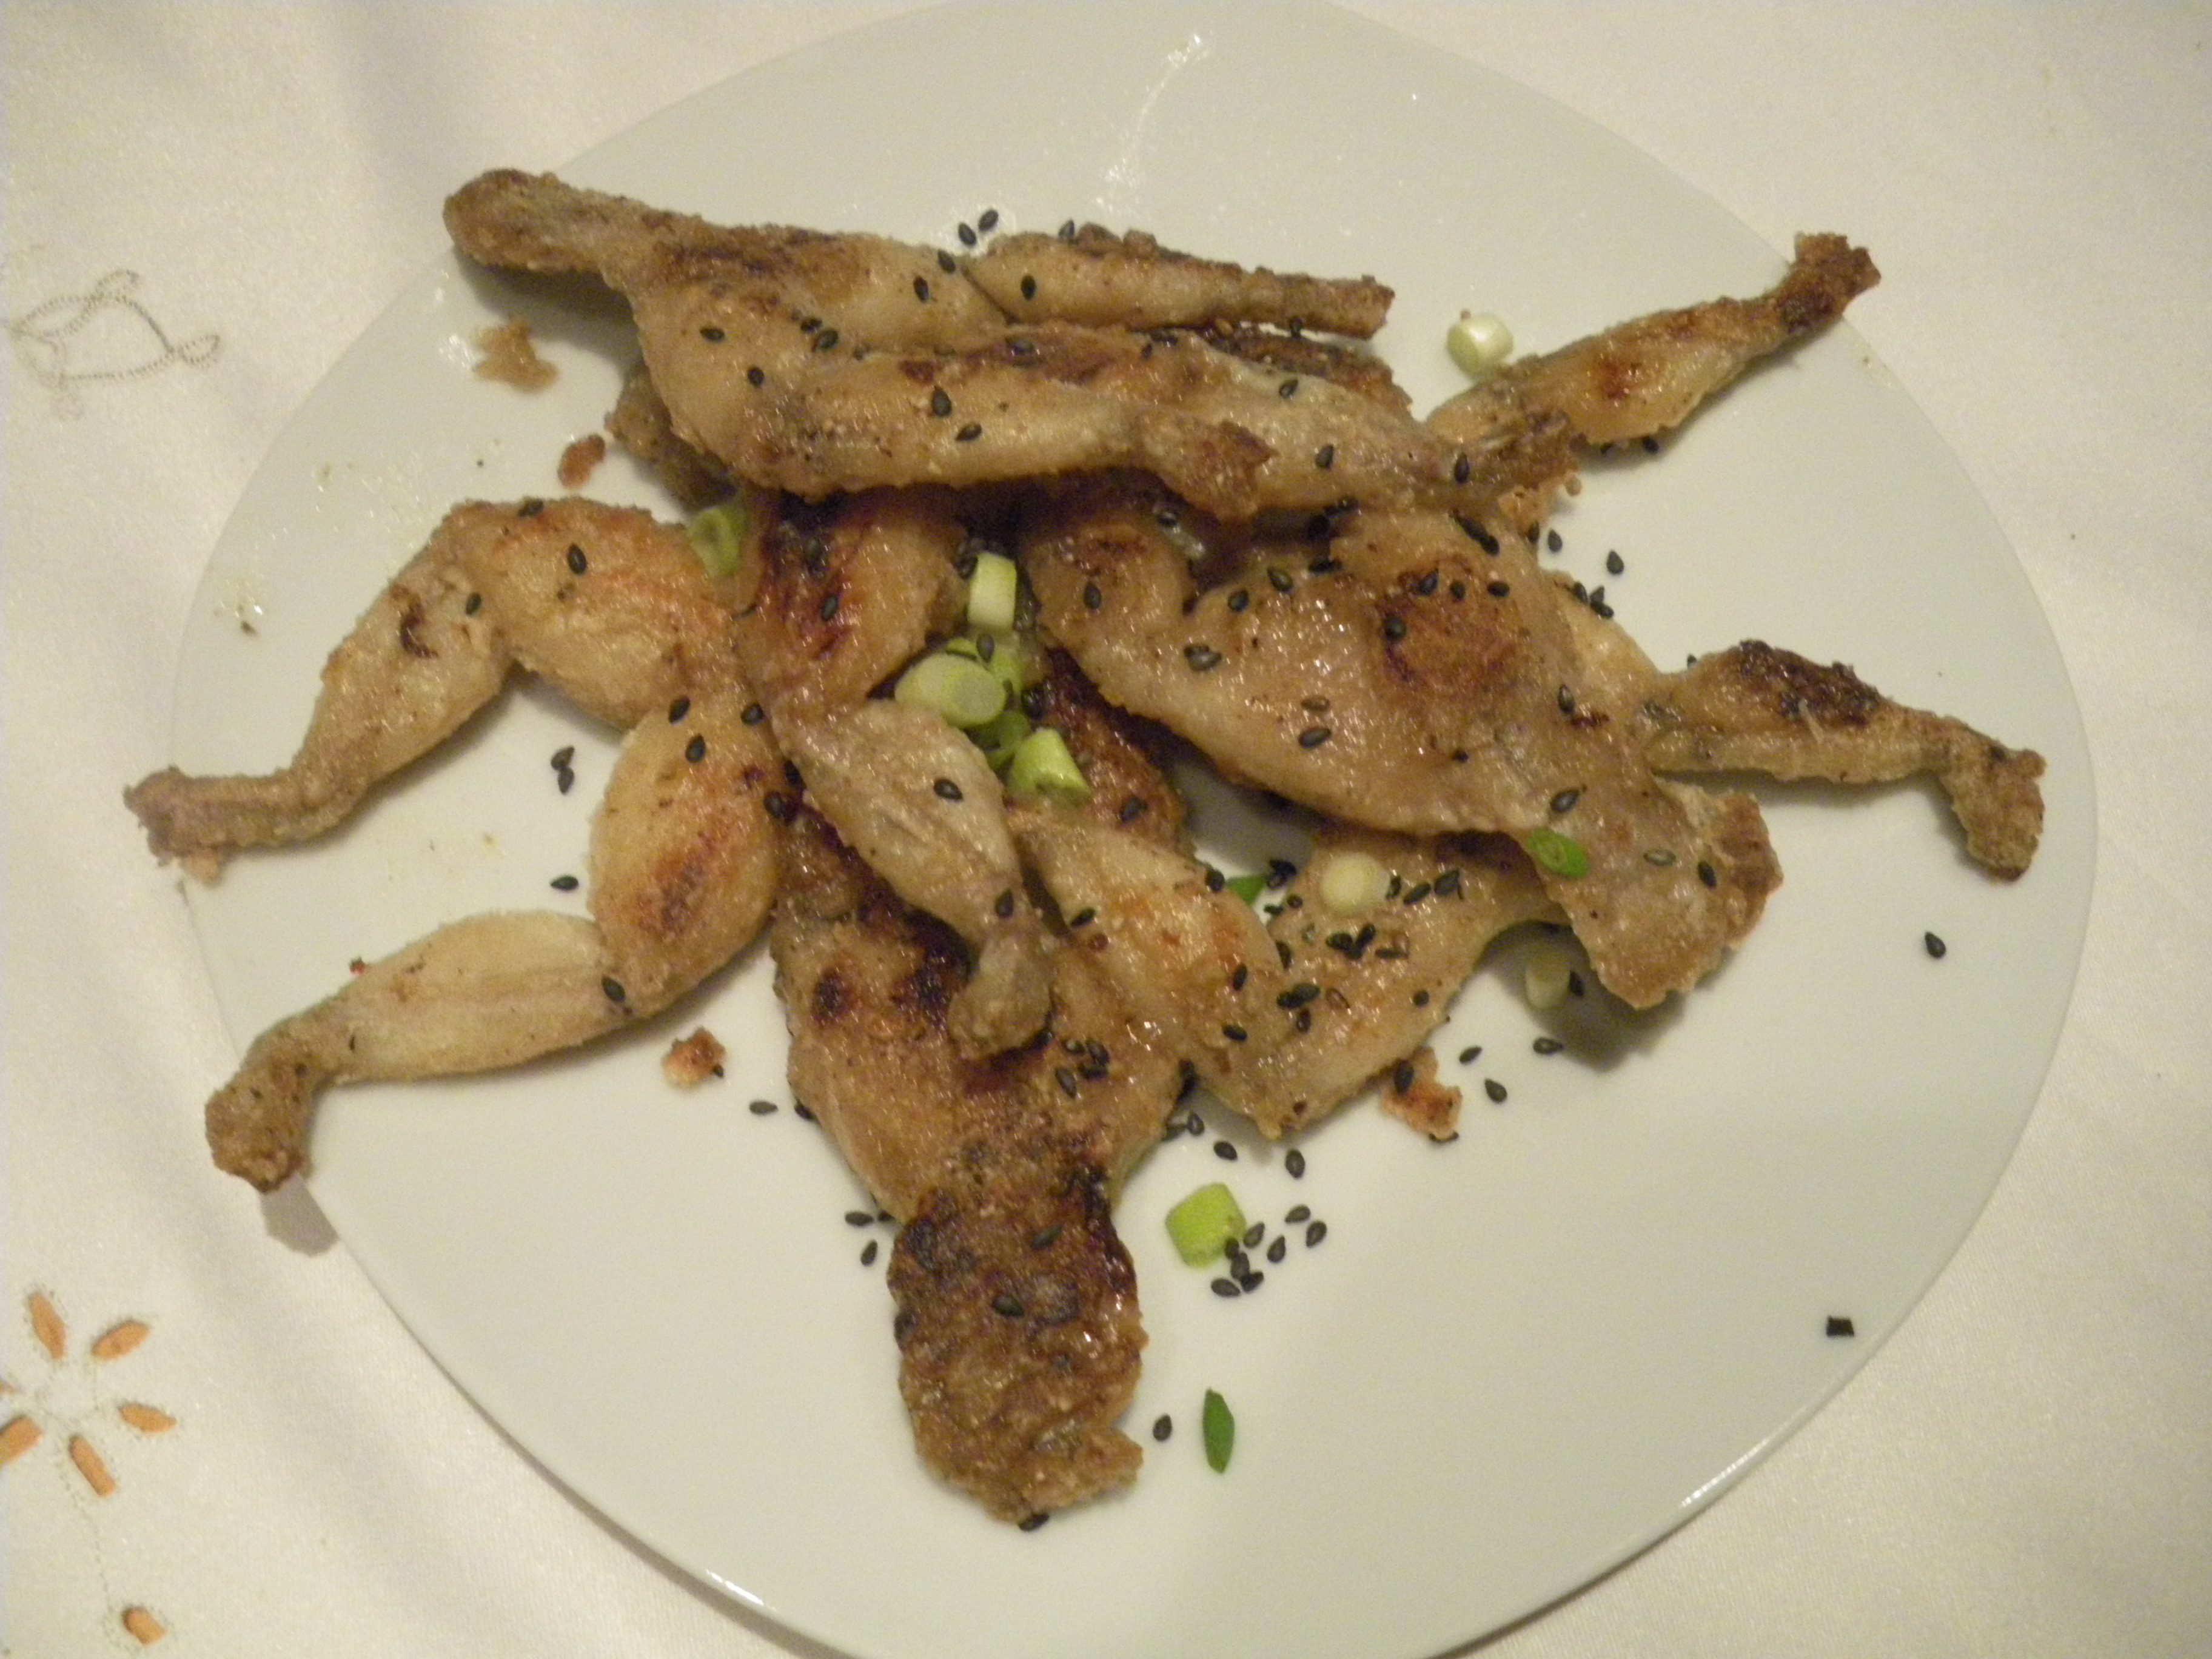 Frog legs. Frog Legs dish. Cooked Frogs. Florida Frog Legs. French Restaurant Frogs Legs.